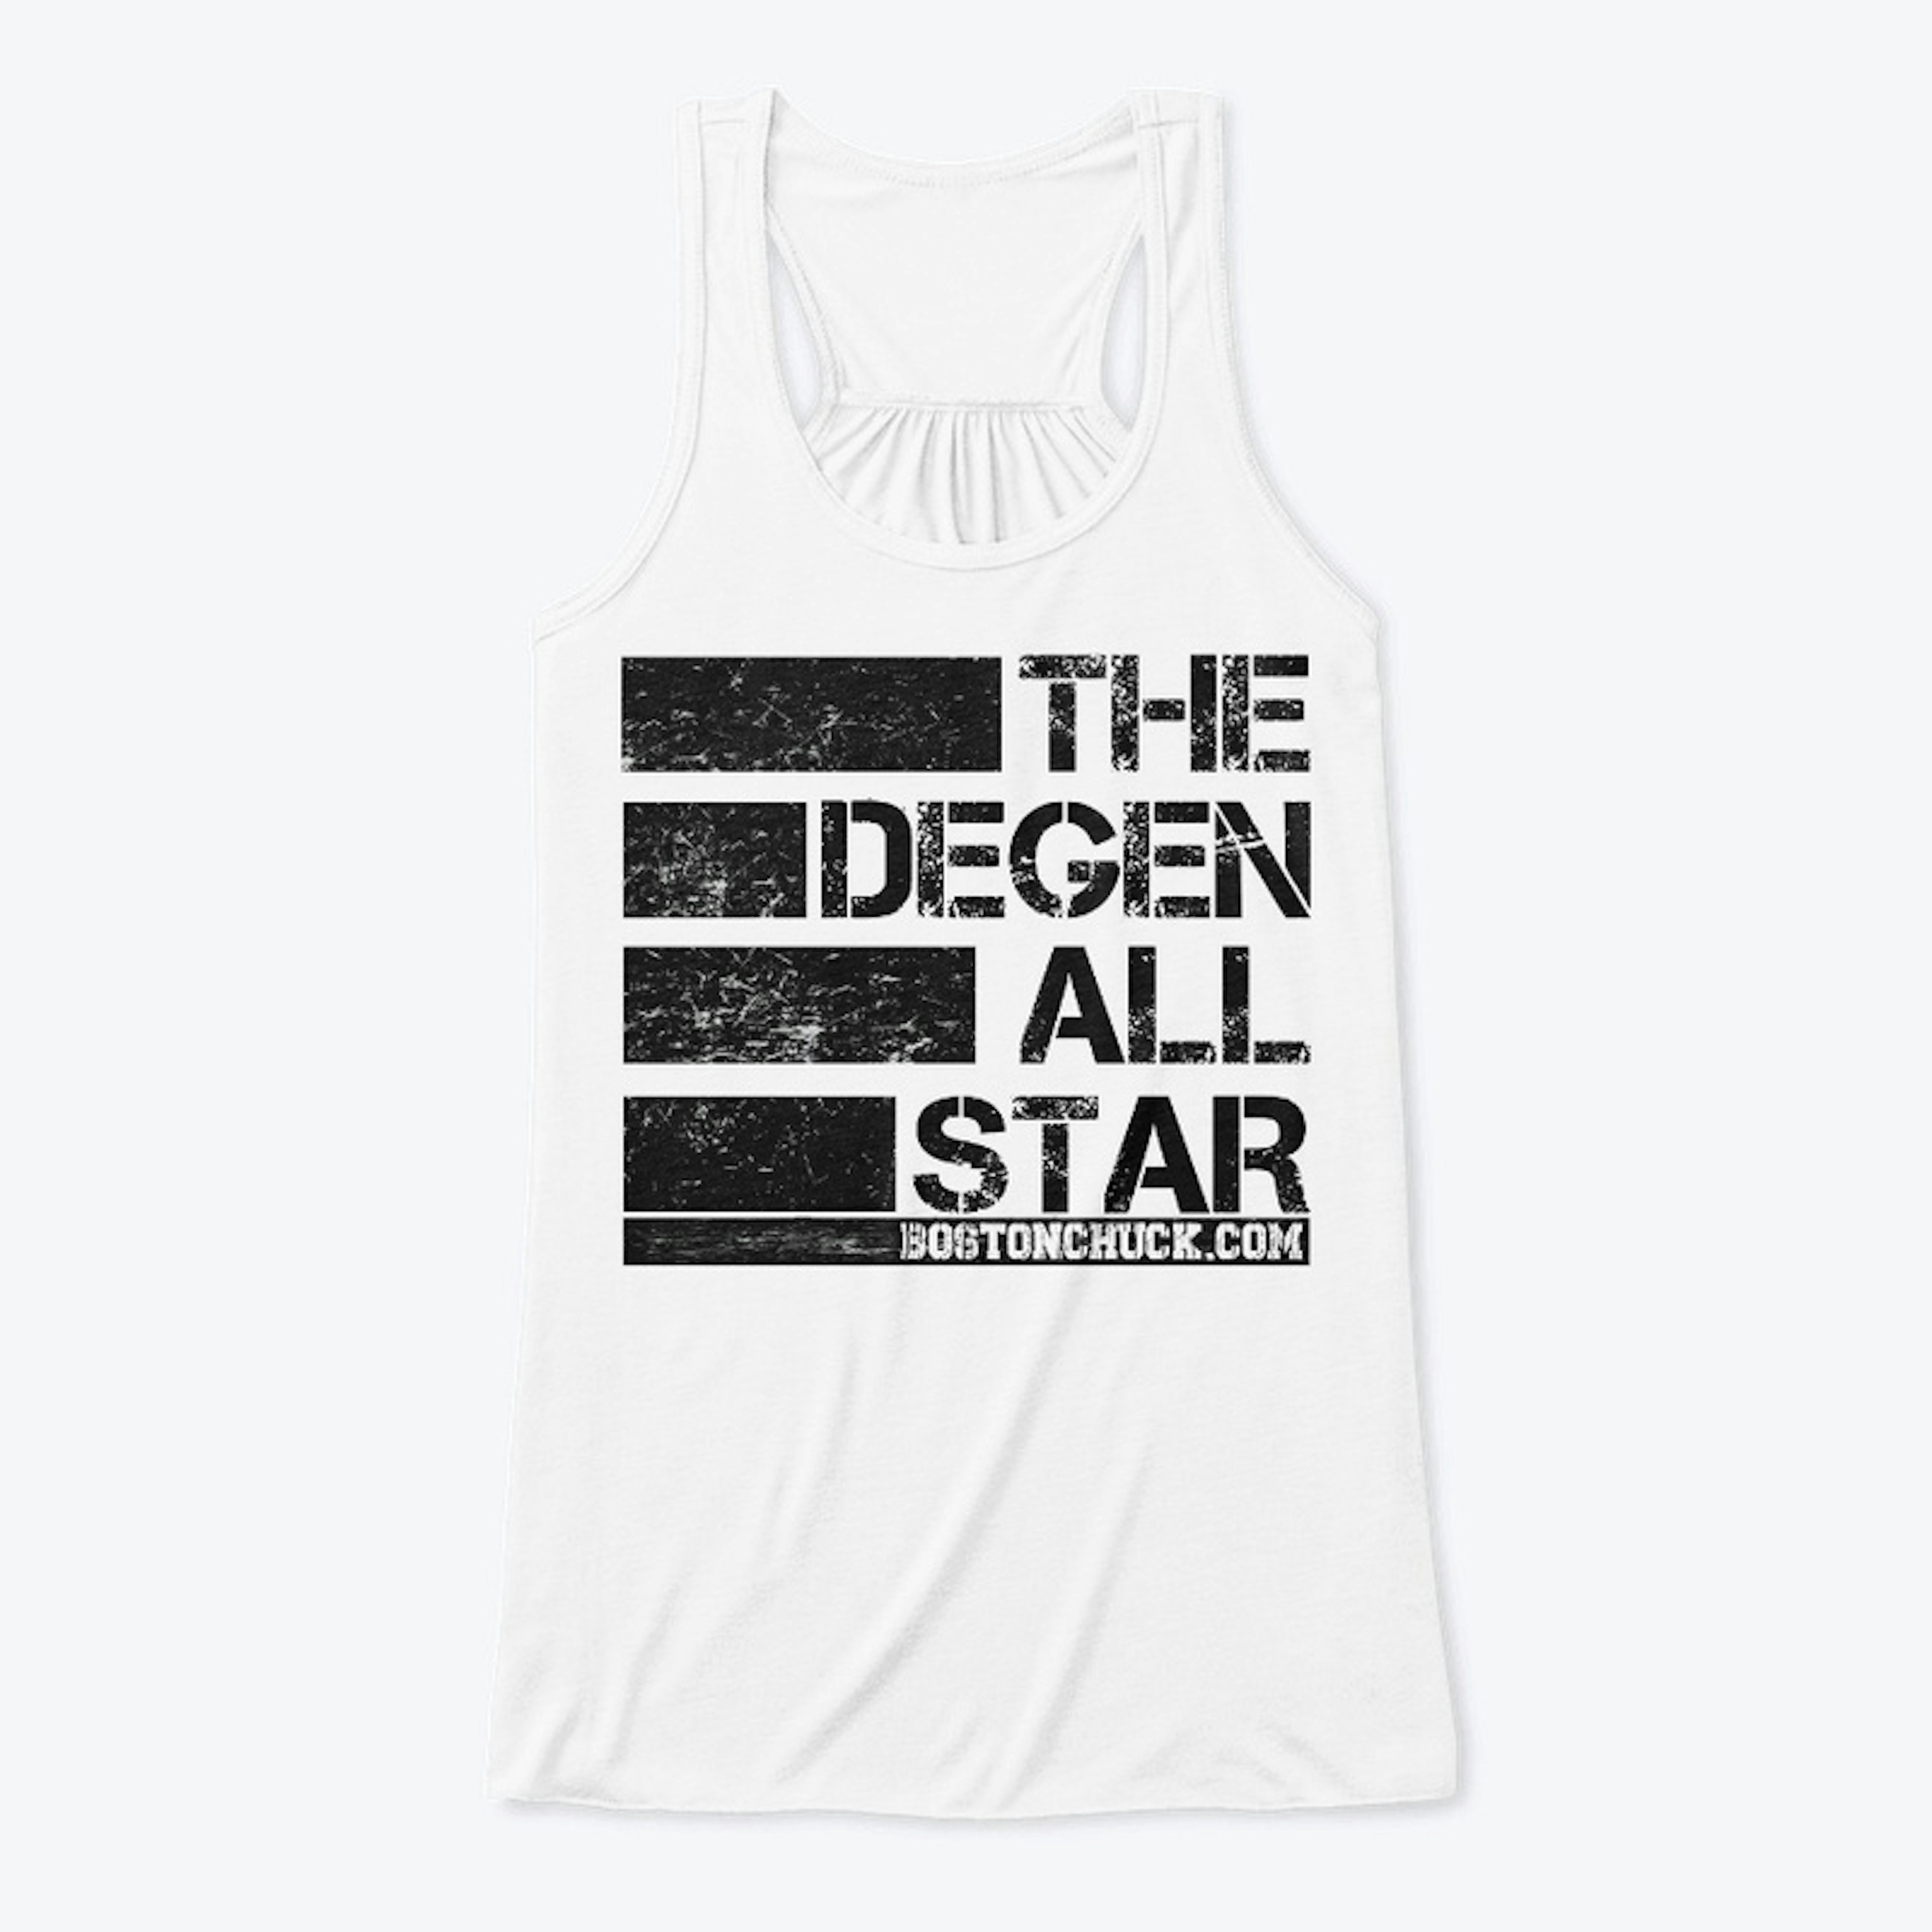 Degen All-Star 2 (The Ary Collection)